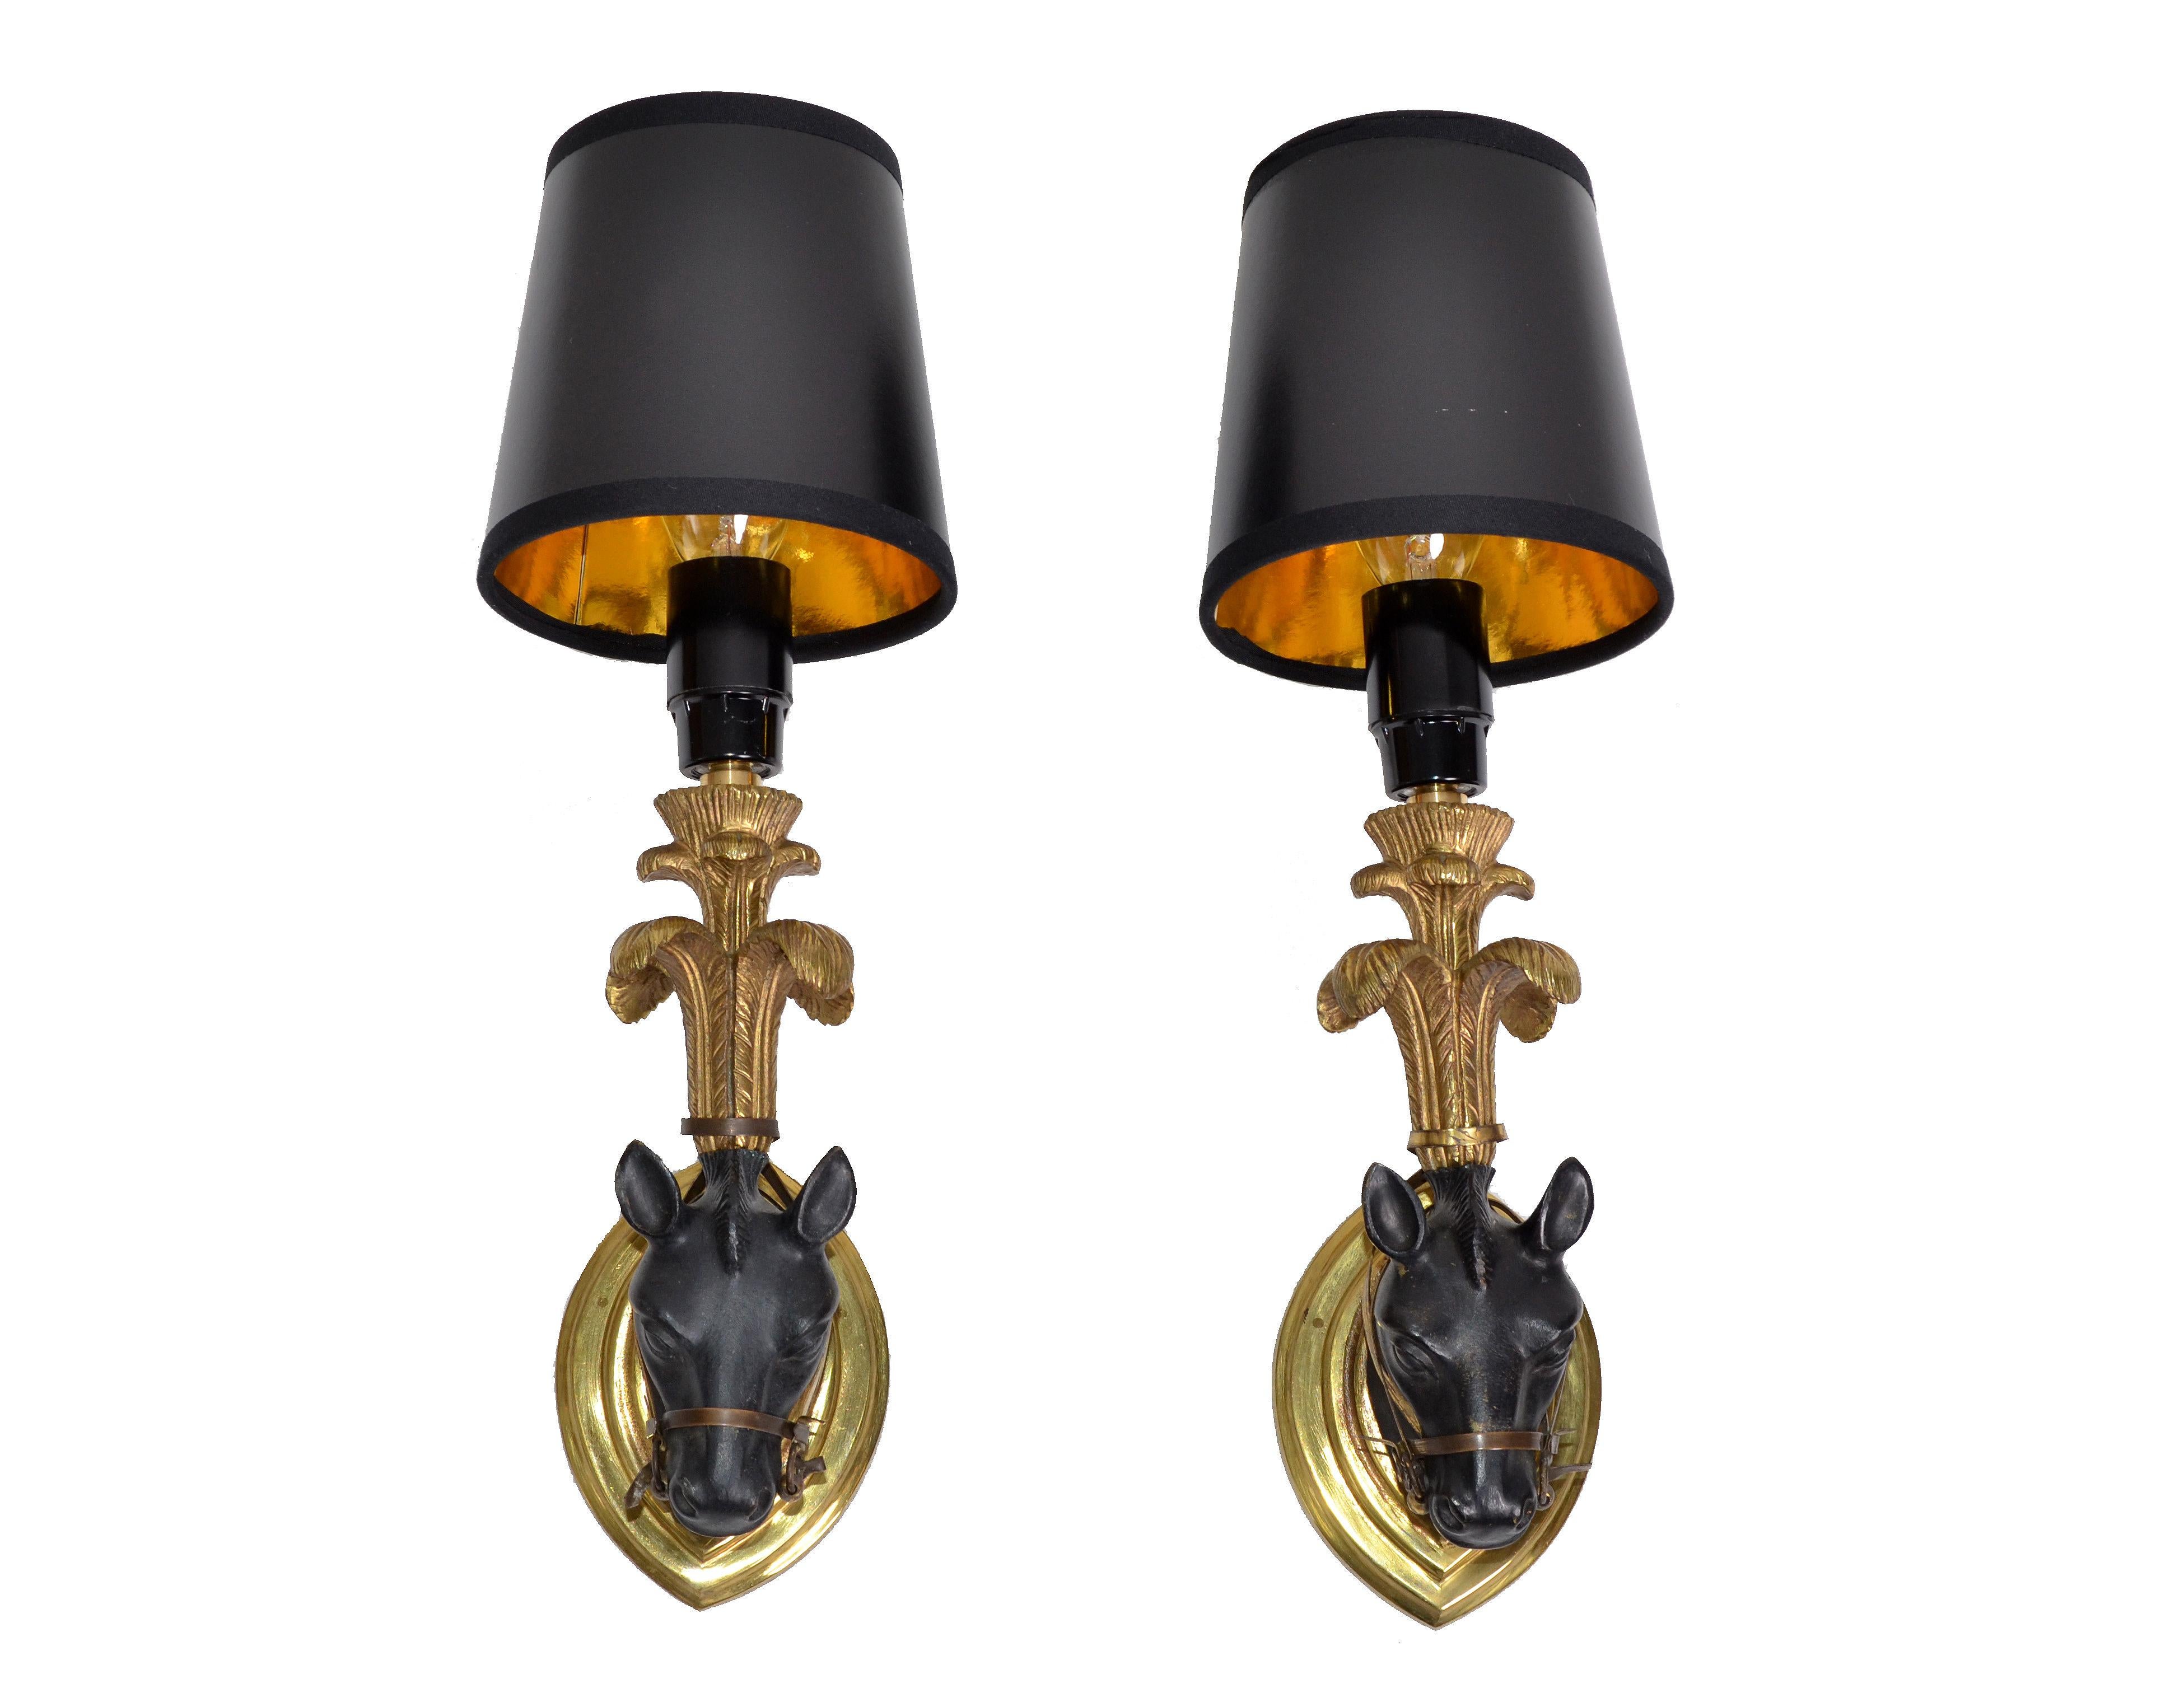 Superb pair of French Mid-Century Modern Bronze horse sconces, Wall Lamps from the late 1950s.
US rewired and in working condition.
1 bulb 25 watt max.
Measures: Back plate 3 inches W, 4.2 inches H.
Have a look on our impressive collection of French